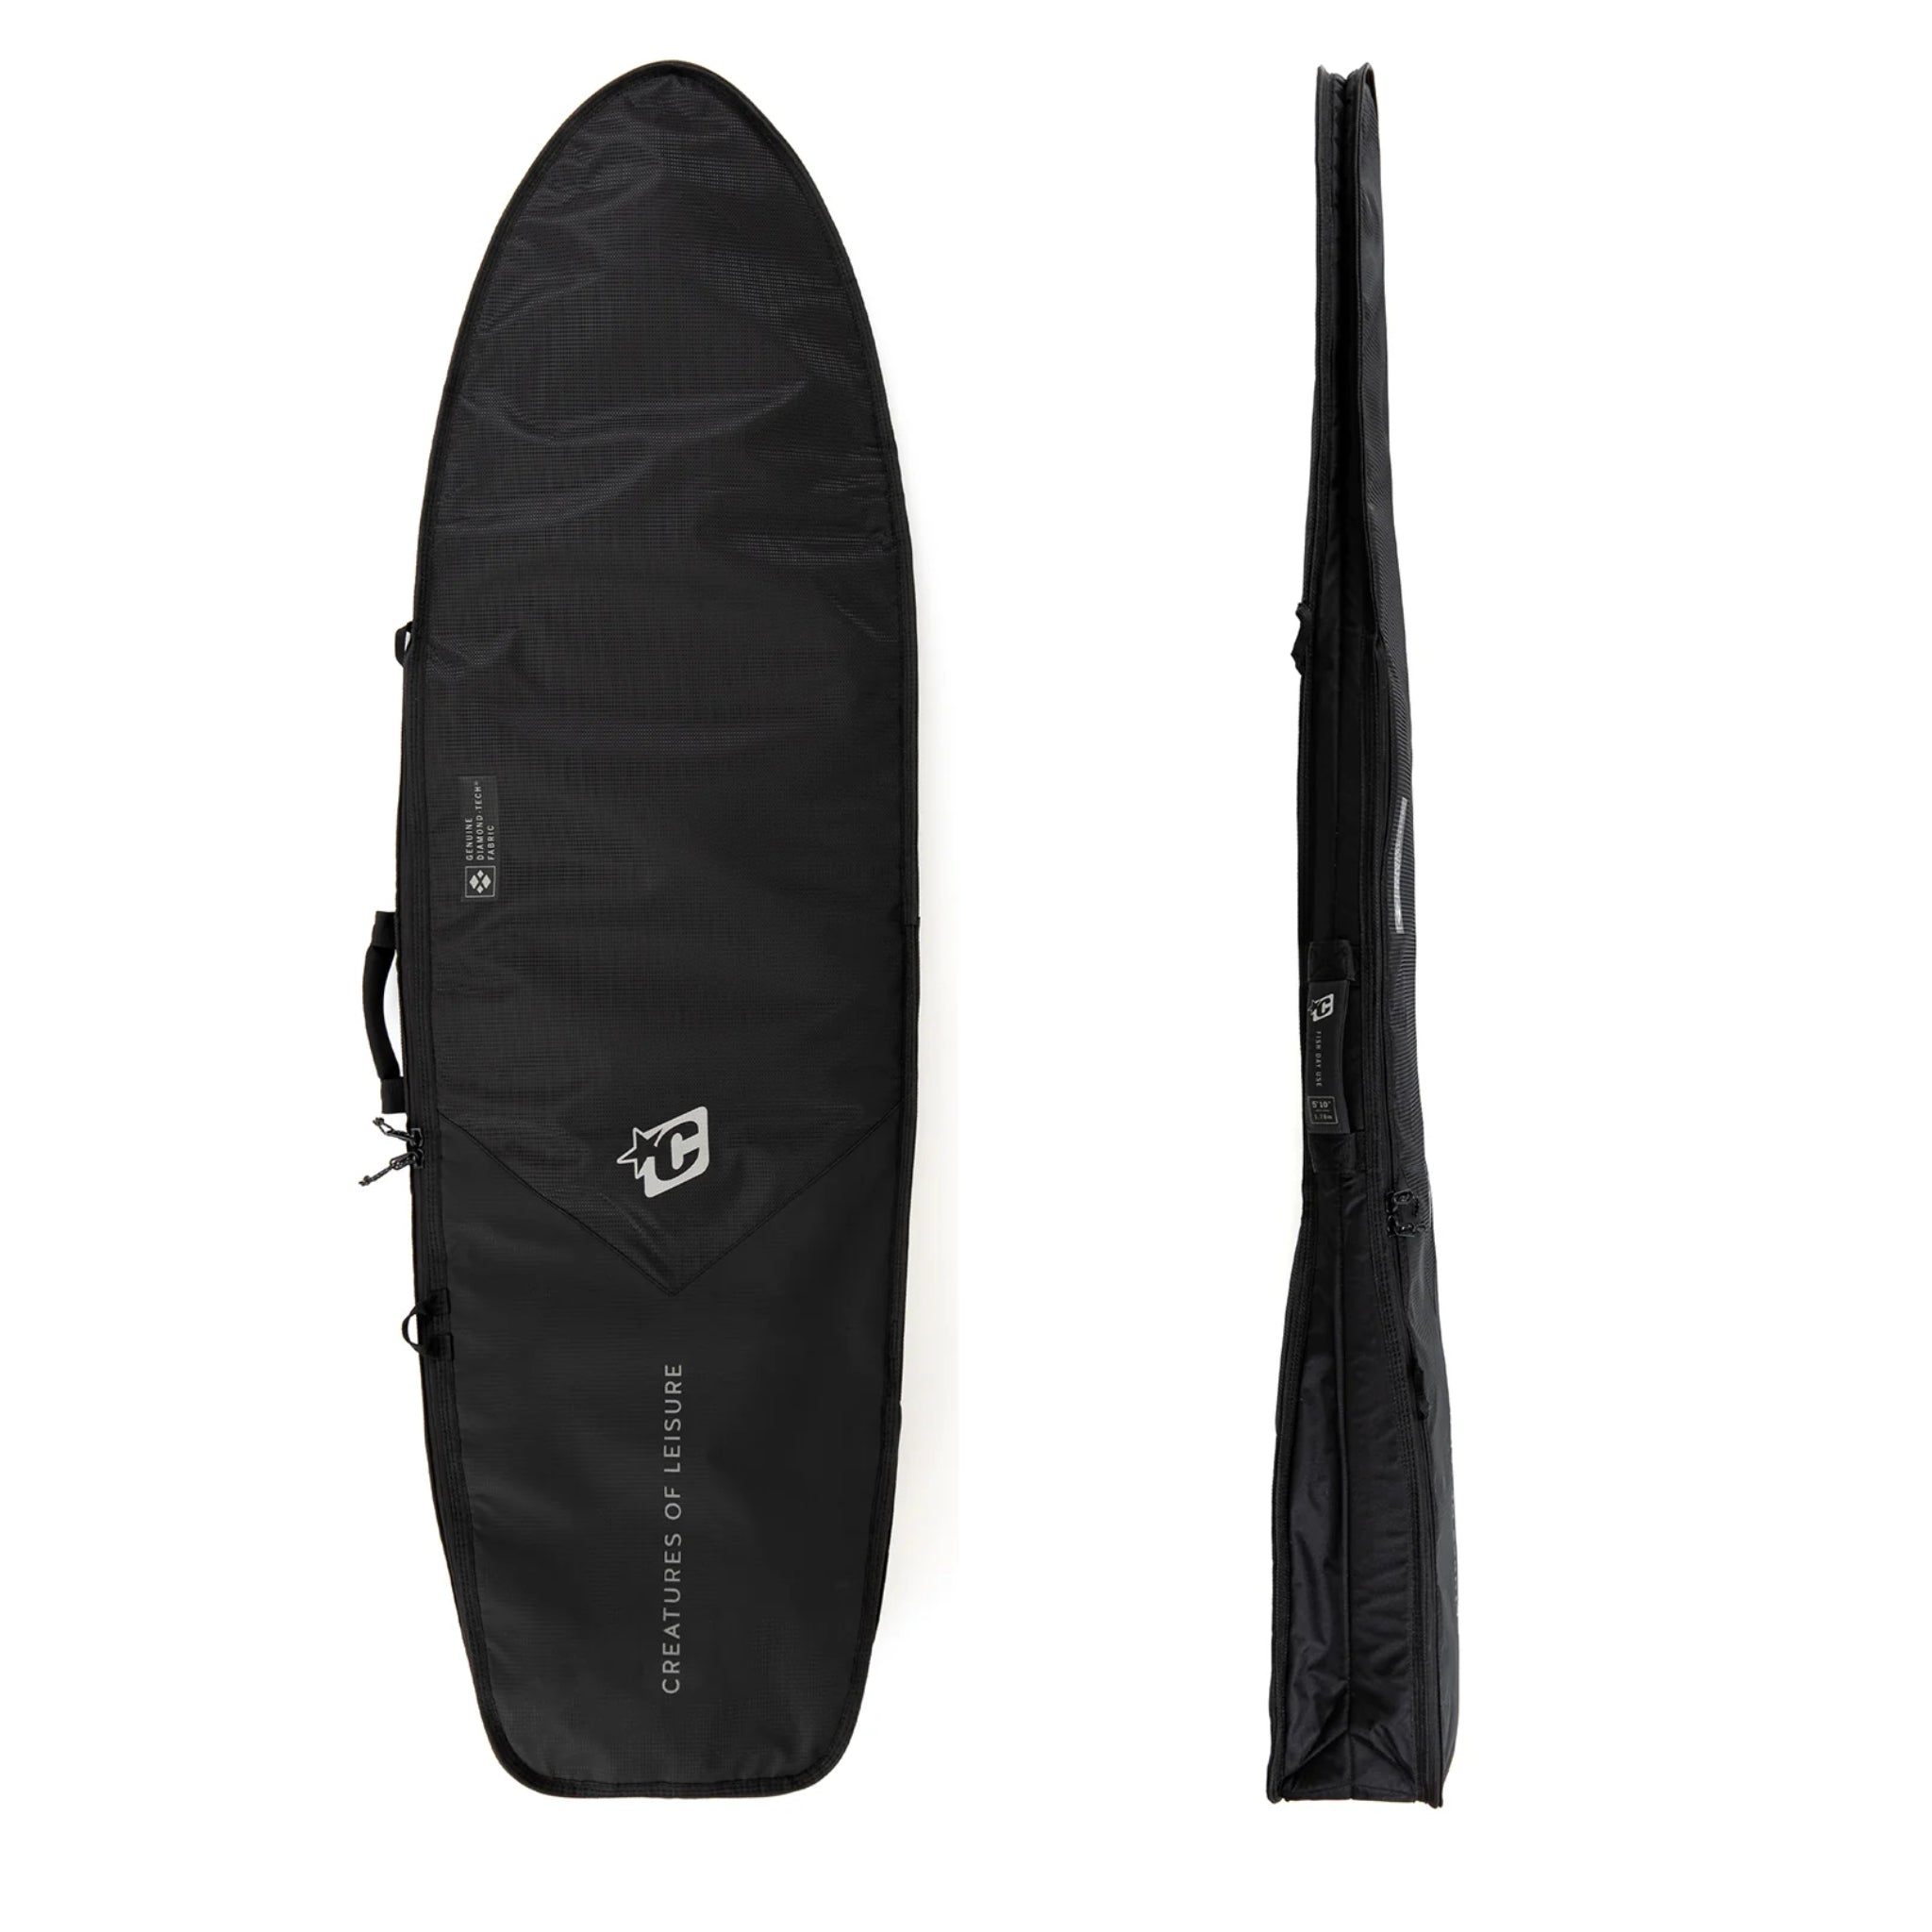 Creatures Fish Day Use Dt2.0 Surfboard Cover